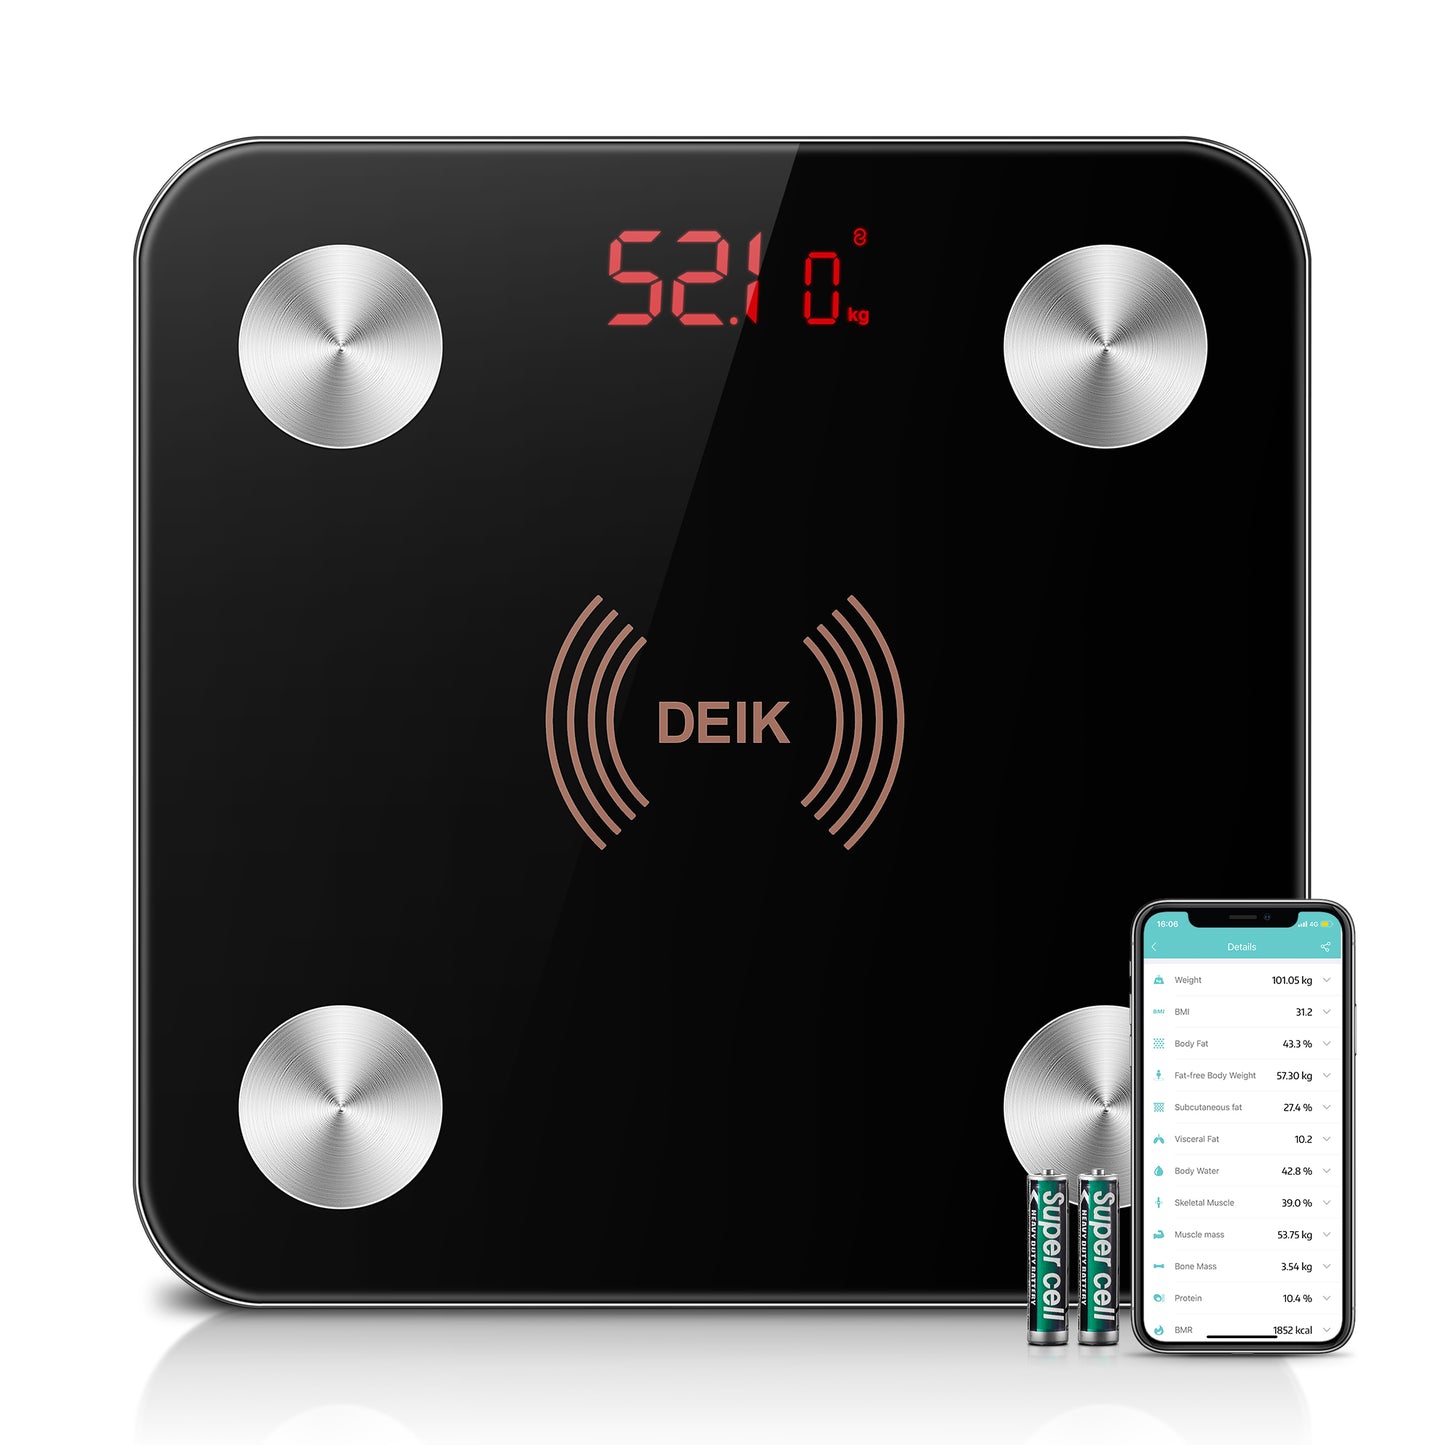 DEIK Smart Digital Body Fat Scale, Black Bluetooth Bathroom Scale, with iOS and Android APP, 180kg/400lb High Precision Measurement, Detects 13 Data including Body Weight, Fat Content, Muscle Mass